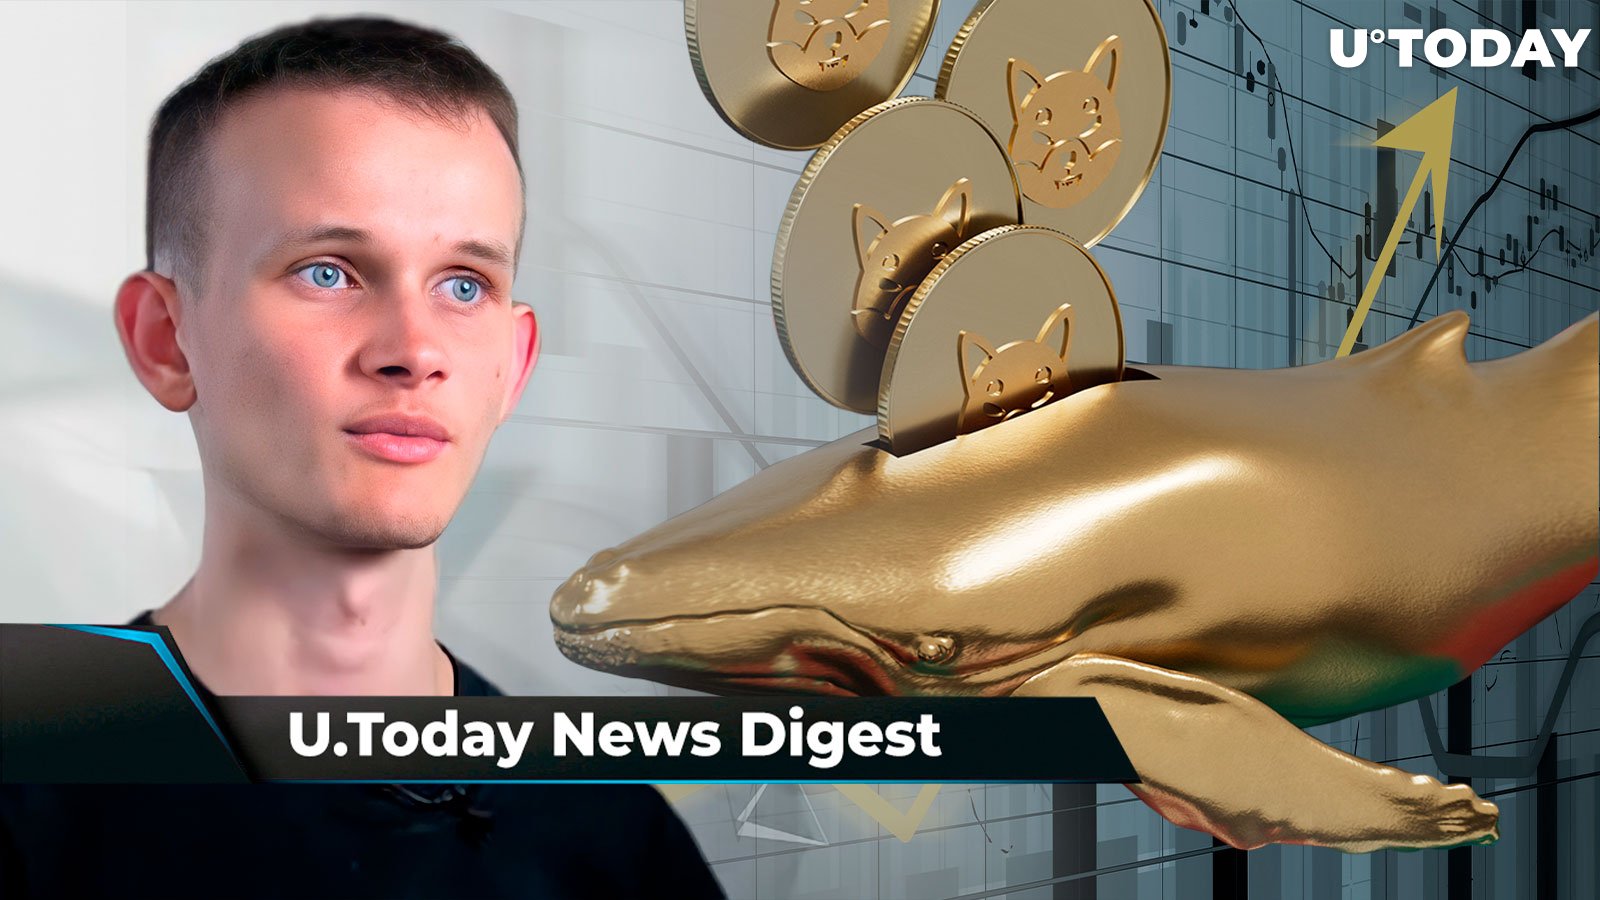 SHIB Trading Volumes Add 114%, Vitalik Buterin Slammed After Tweeting on Censorship Resistance, This Drives Whales to Buy More SHIB: Crypto News Digest by U.Today